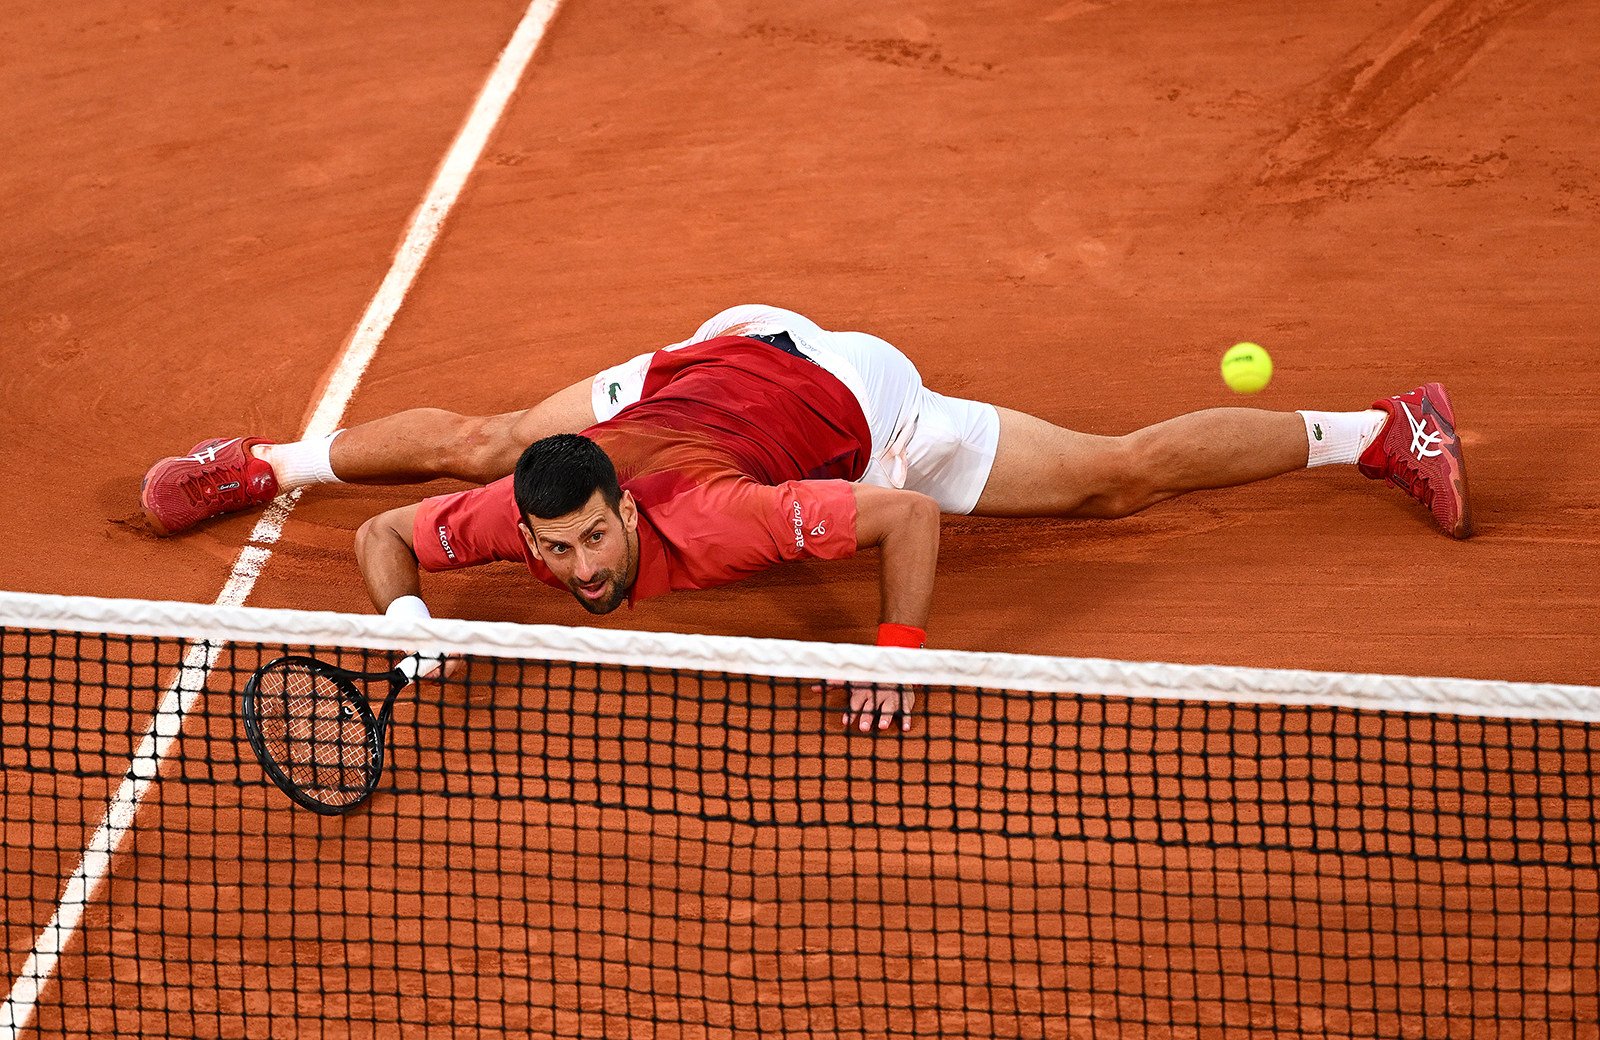 Novak Djokovic slides at the net for a forehand against Francisco Cerundolo during their men’s singles fourth round match at the French Open. Photo: Getty Images